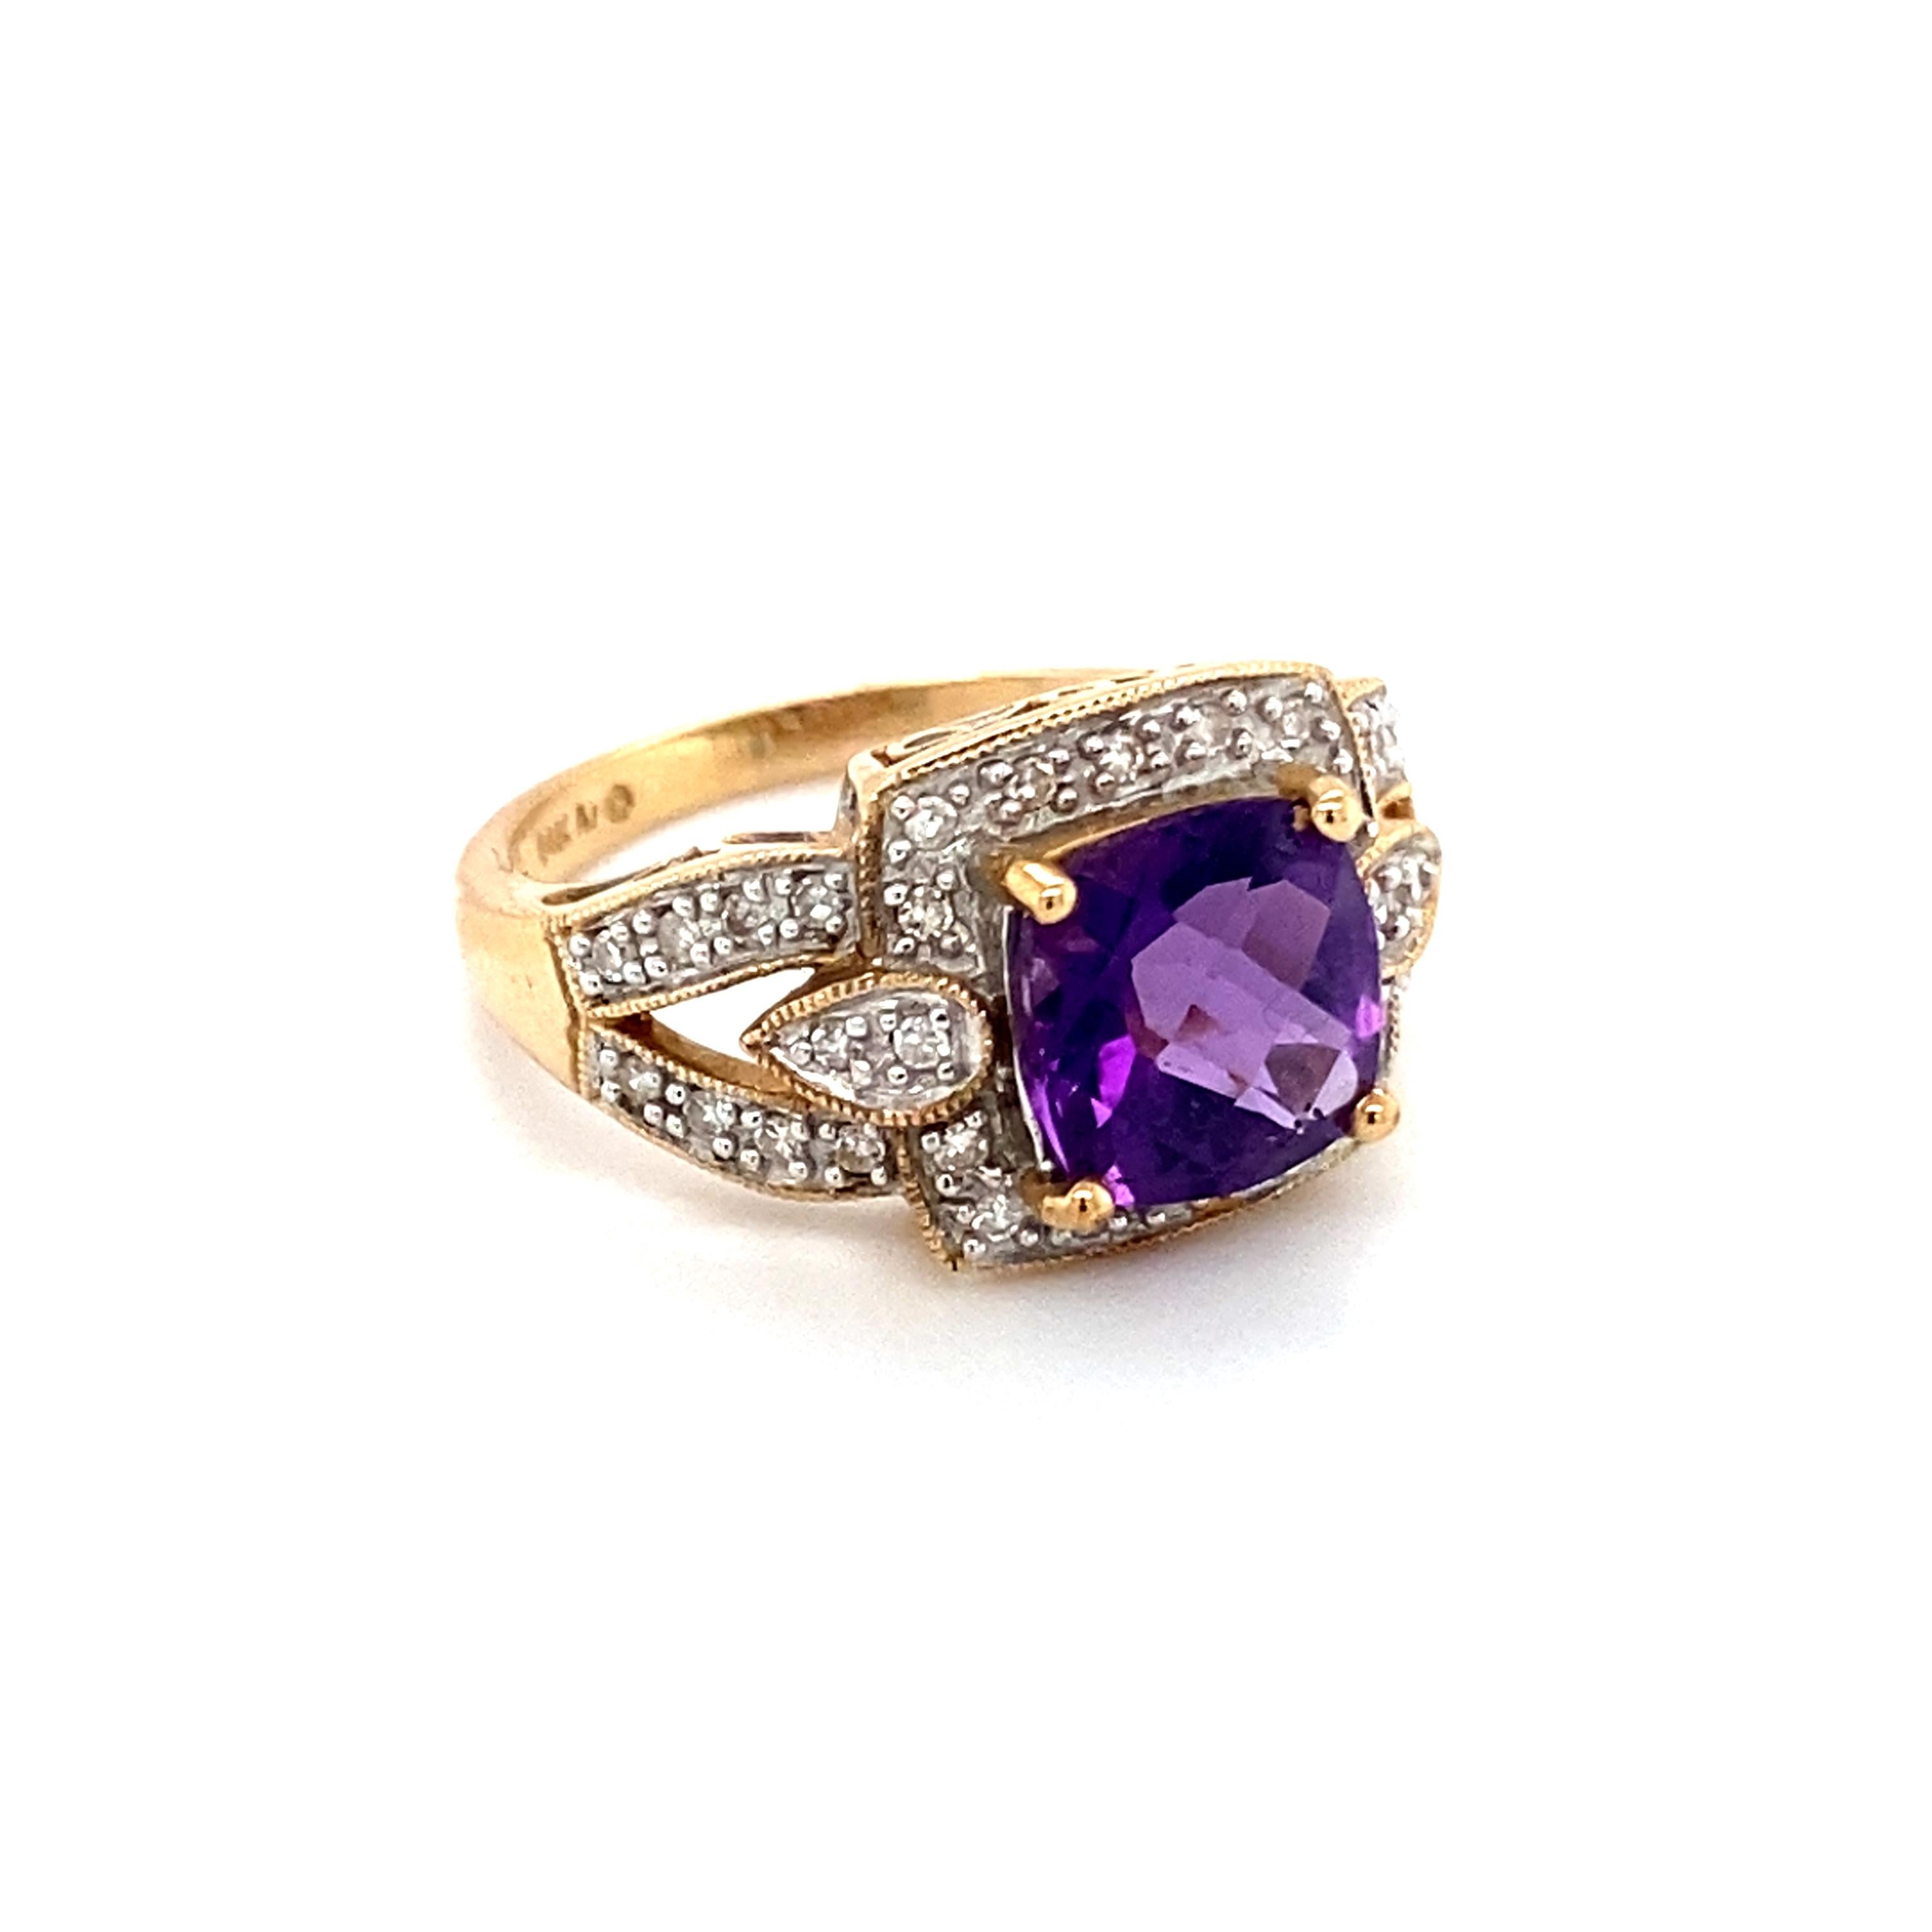 Item Features:
2.33 carat Checkerboard Cushion Cut Purple Amethyst Center Stone
0.30 carat total accent diamonds
14 Karat Yellow Gold

Ring Details:
Metal Type: 14 karat yellow gold
Weight: 4.6 grams
Ring Size: 7 (sizable)
Finger to top of stone